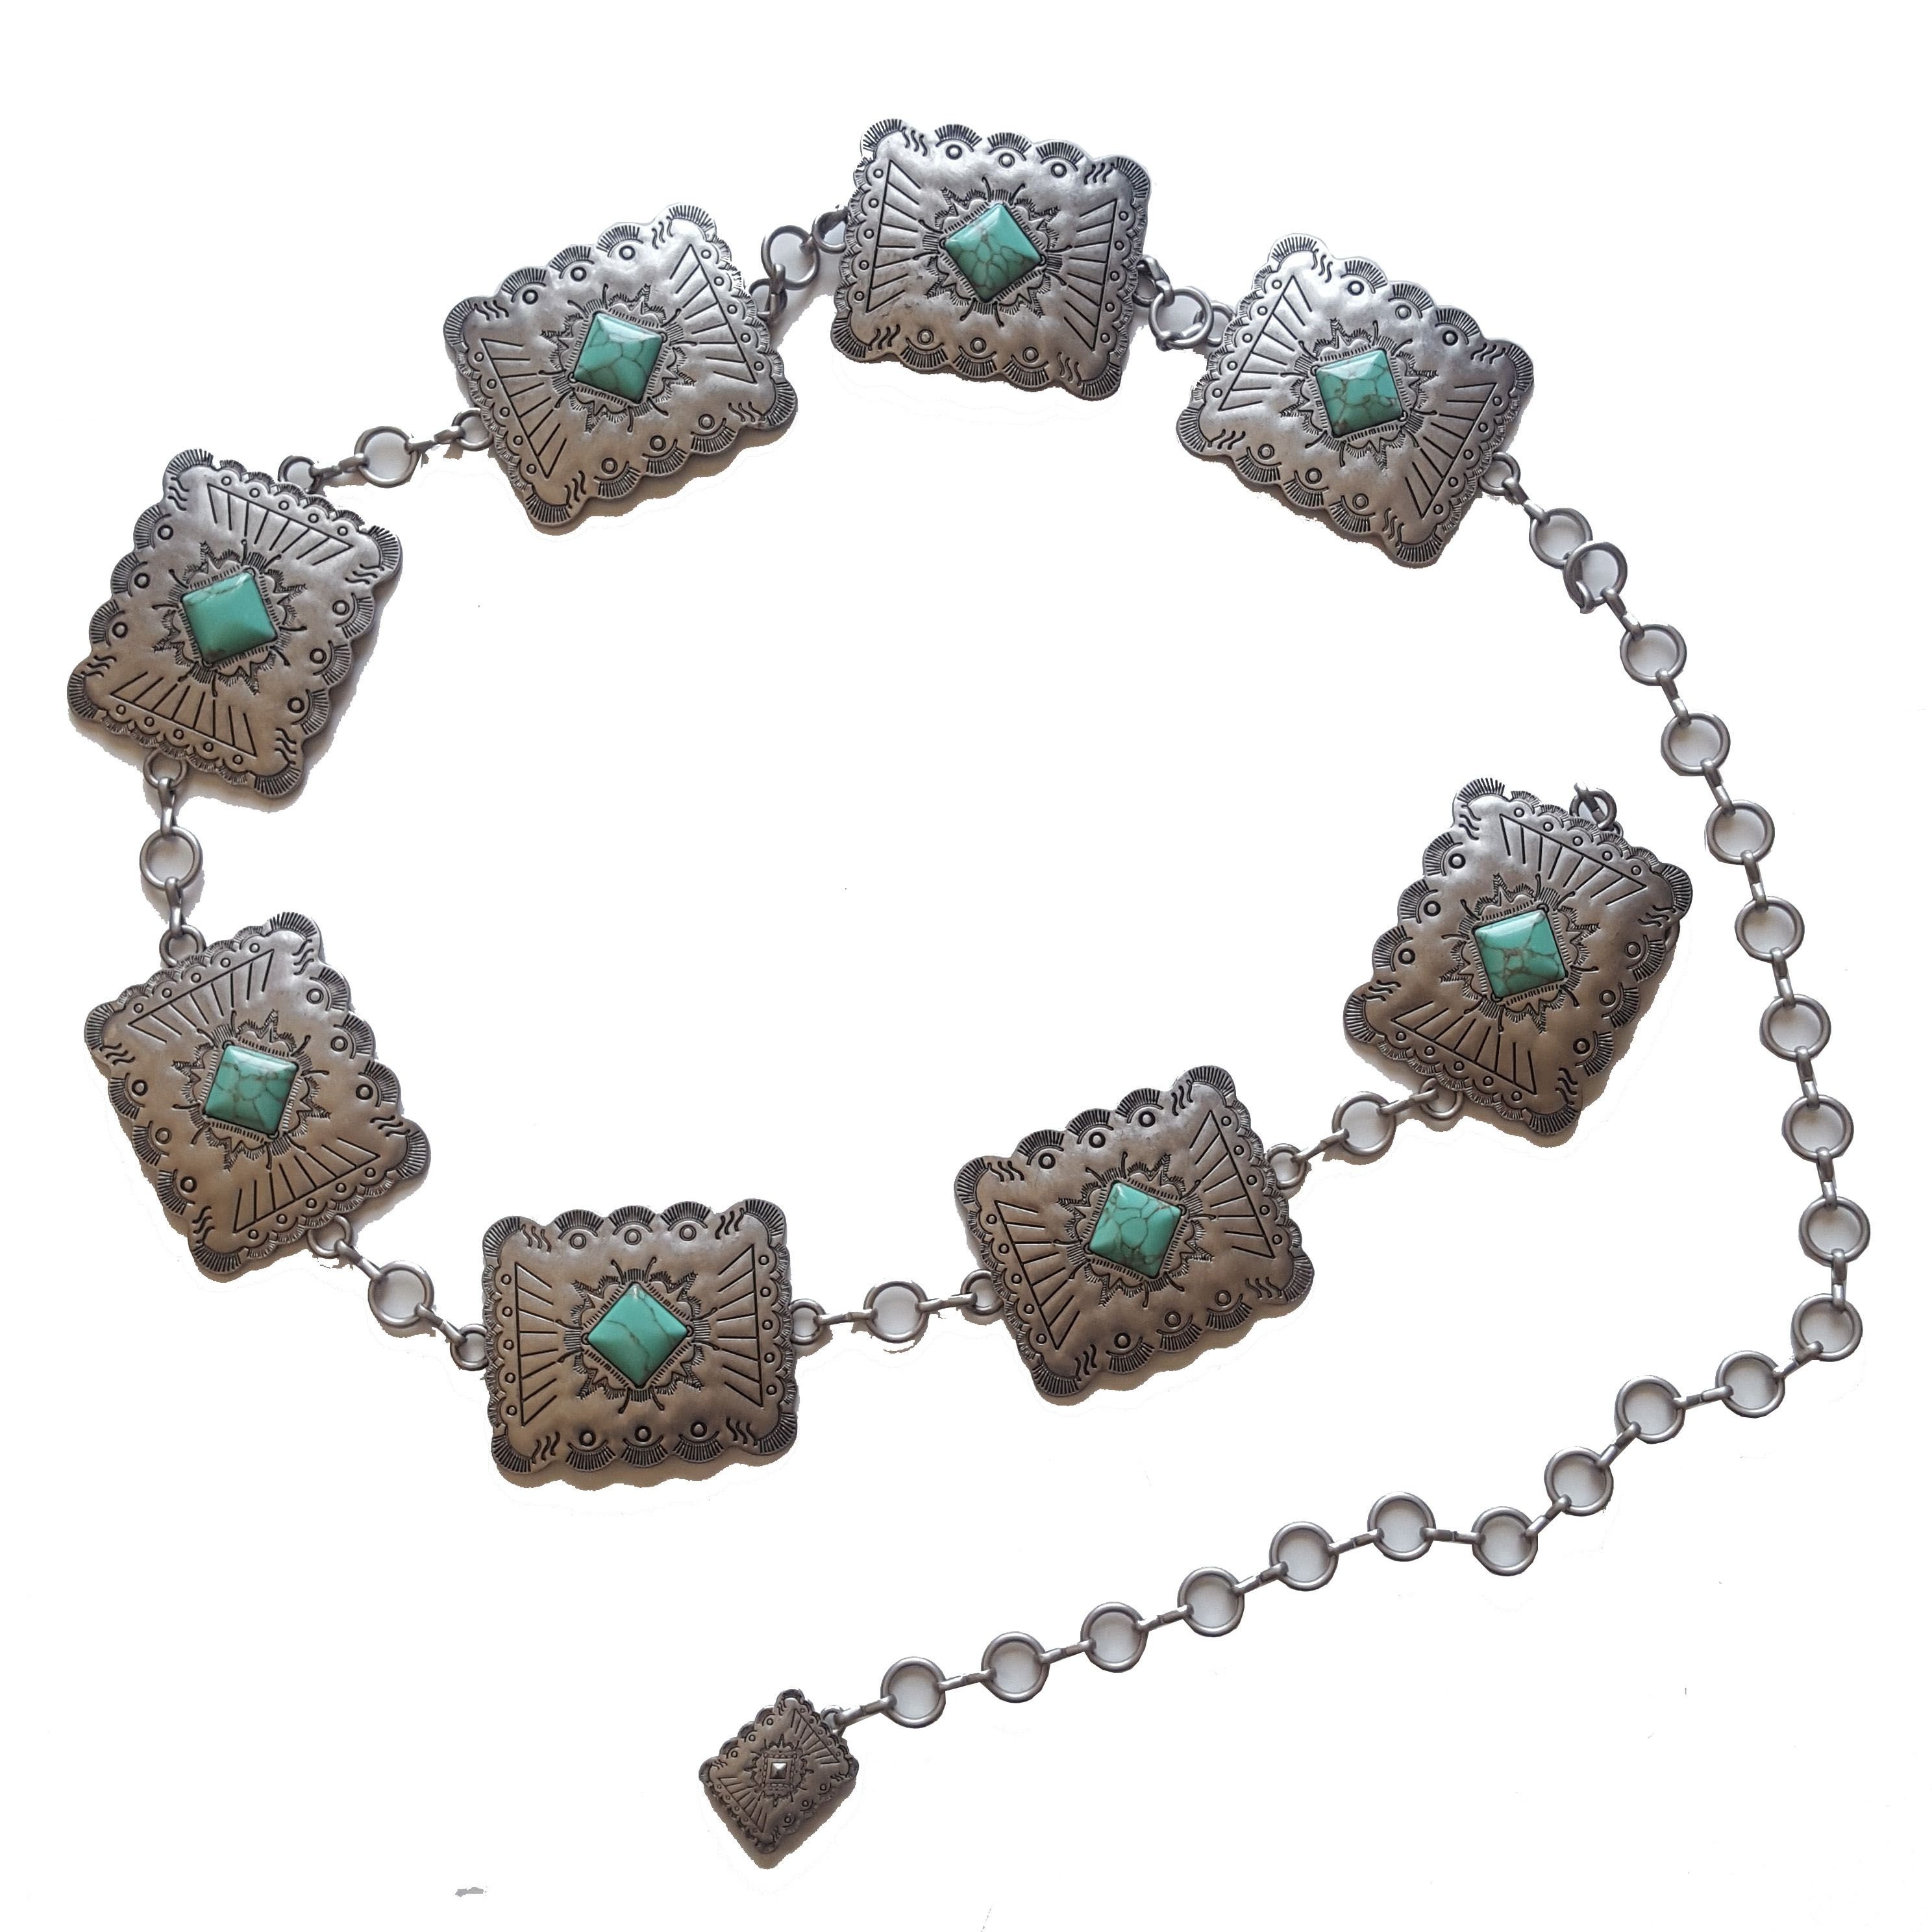 Turquoise Square Concho Chain Belt